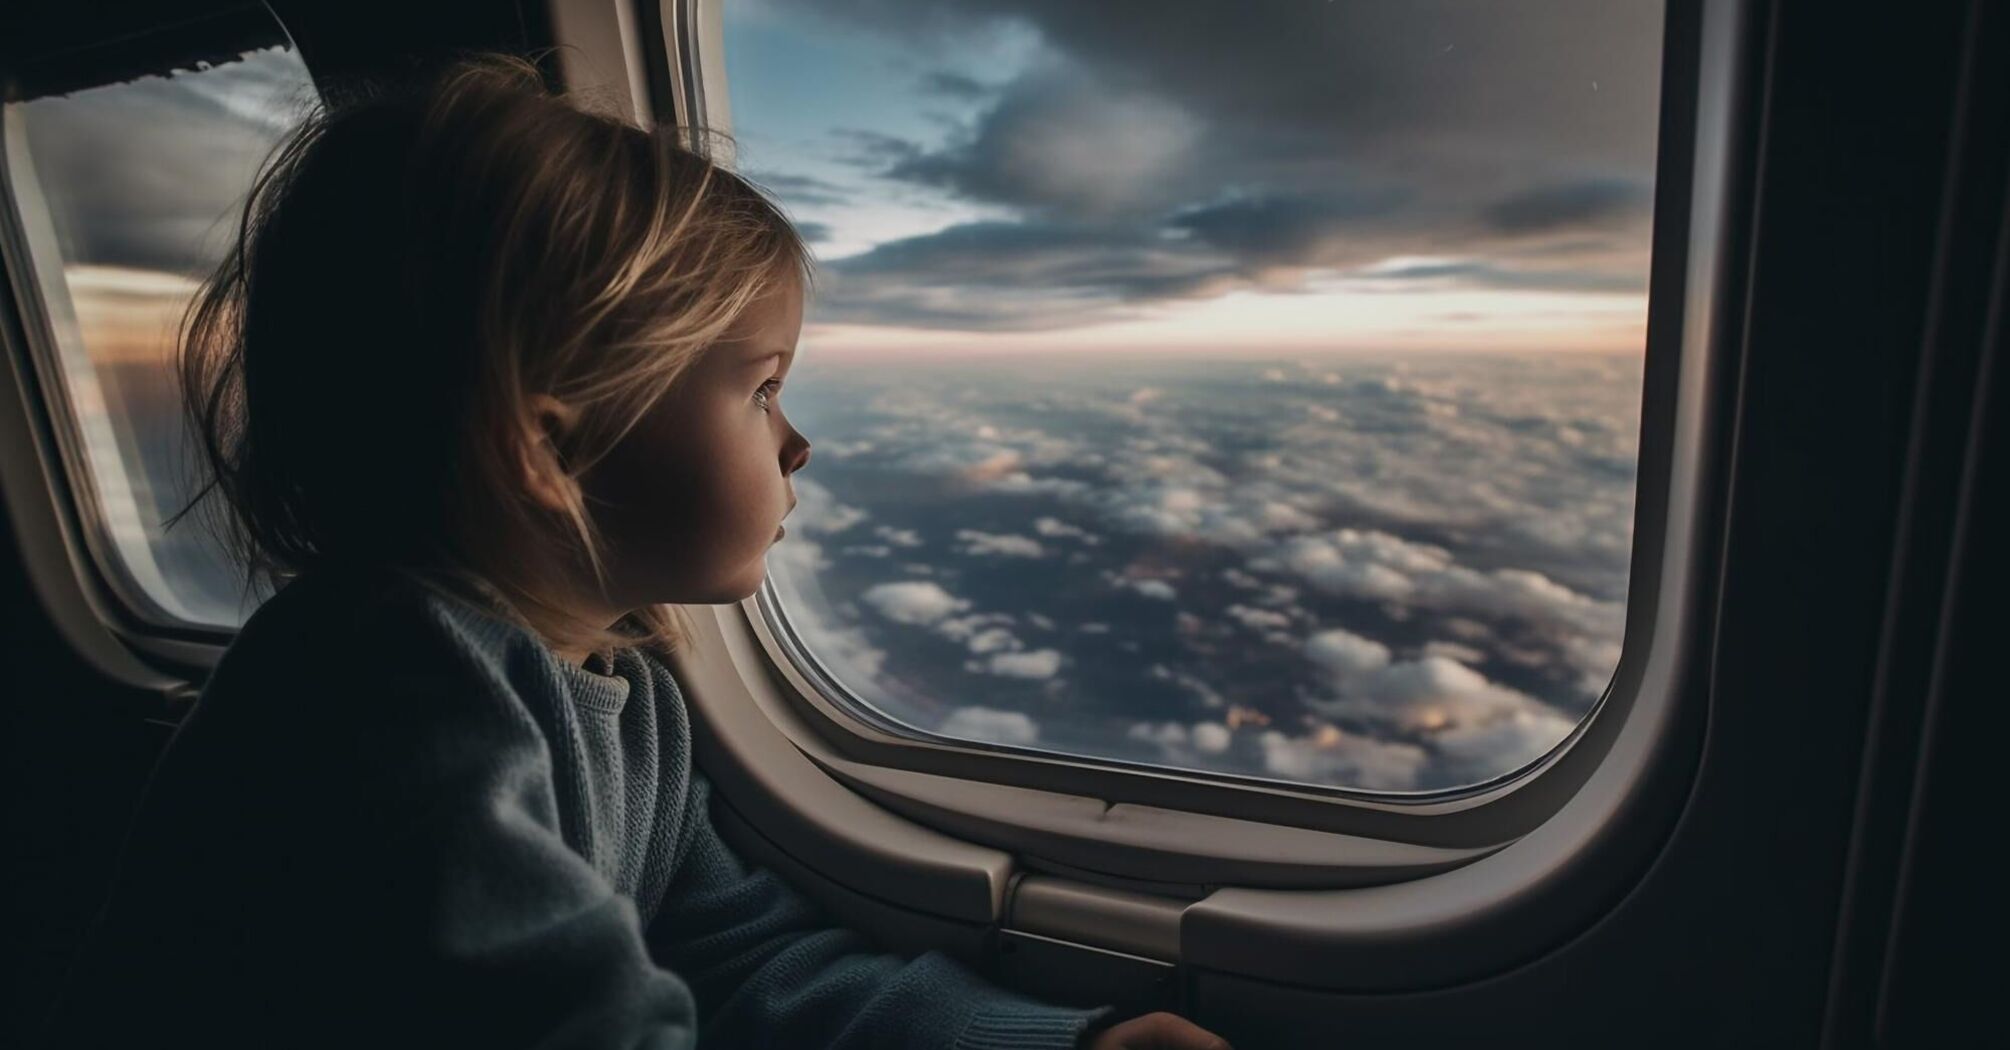 Without panic or stress: Tips for travelling with a child